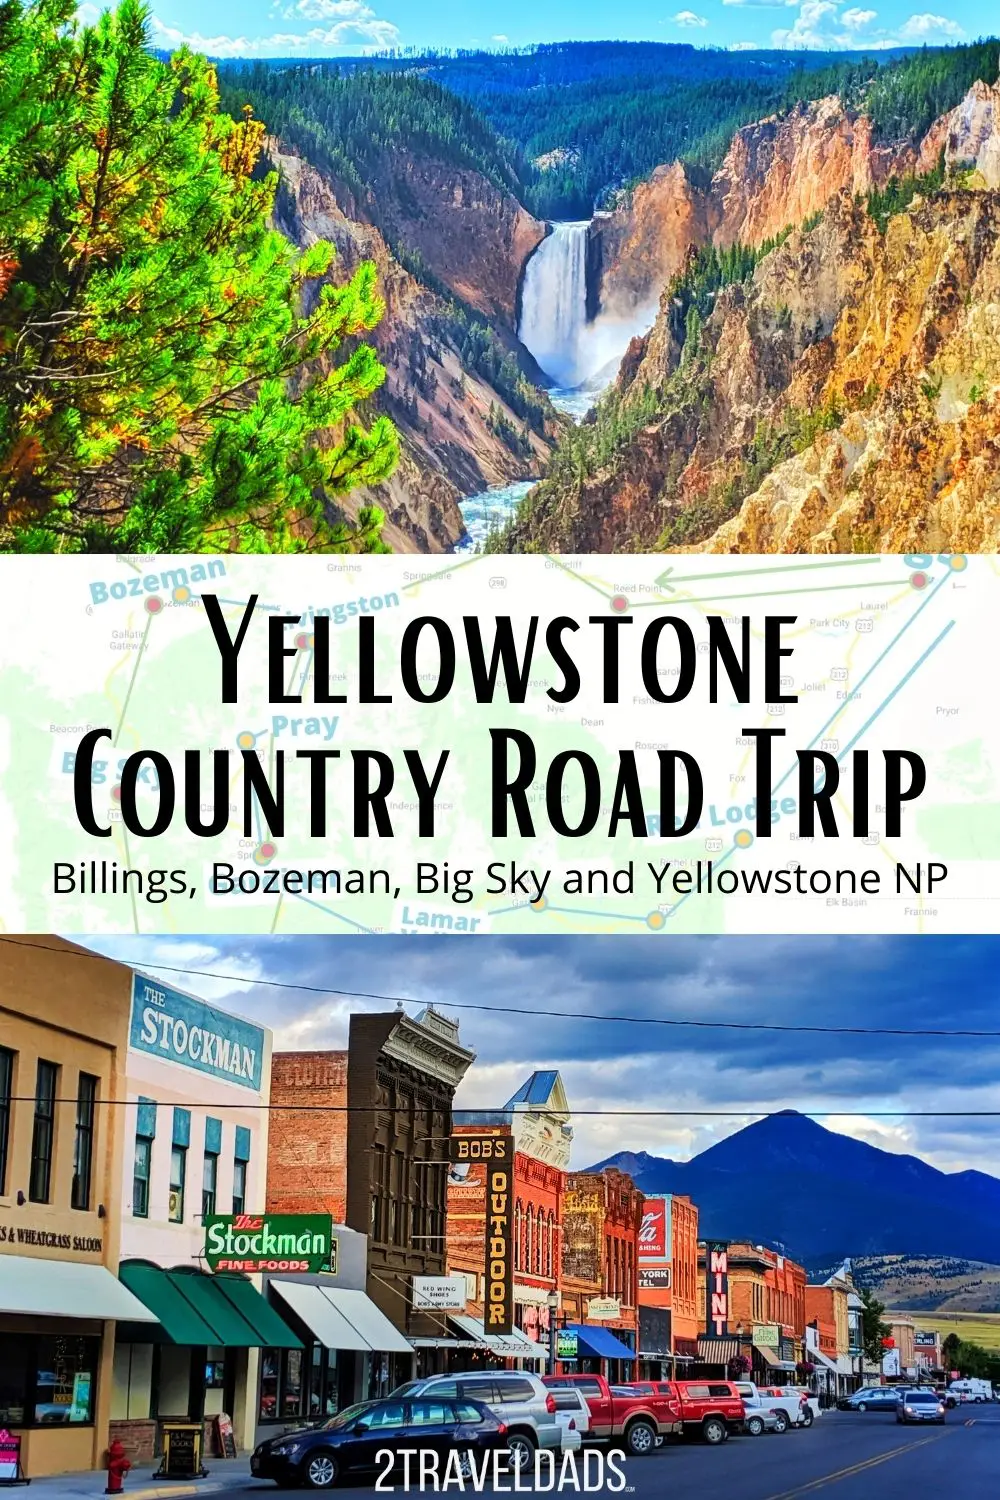 Yellowstone Country is perfect for a Montana road trip. Starting in Billings or Bozeman, explore Montana and Yellowstone National Park.